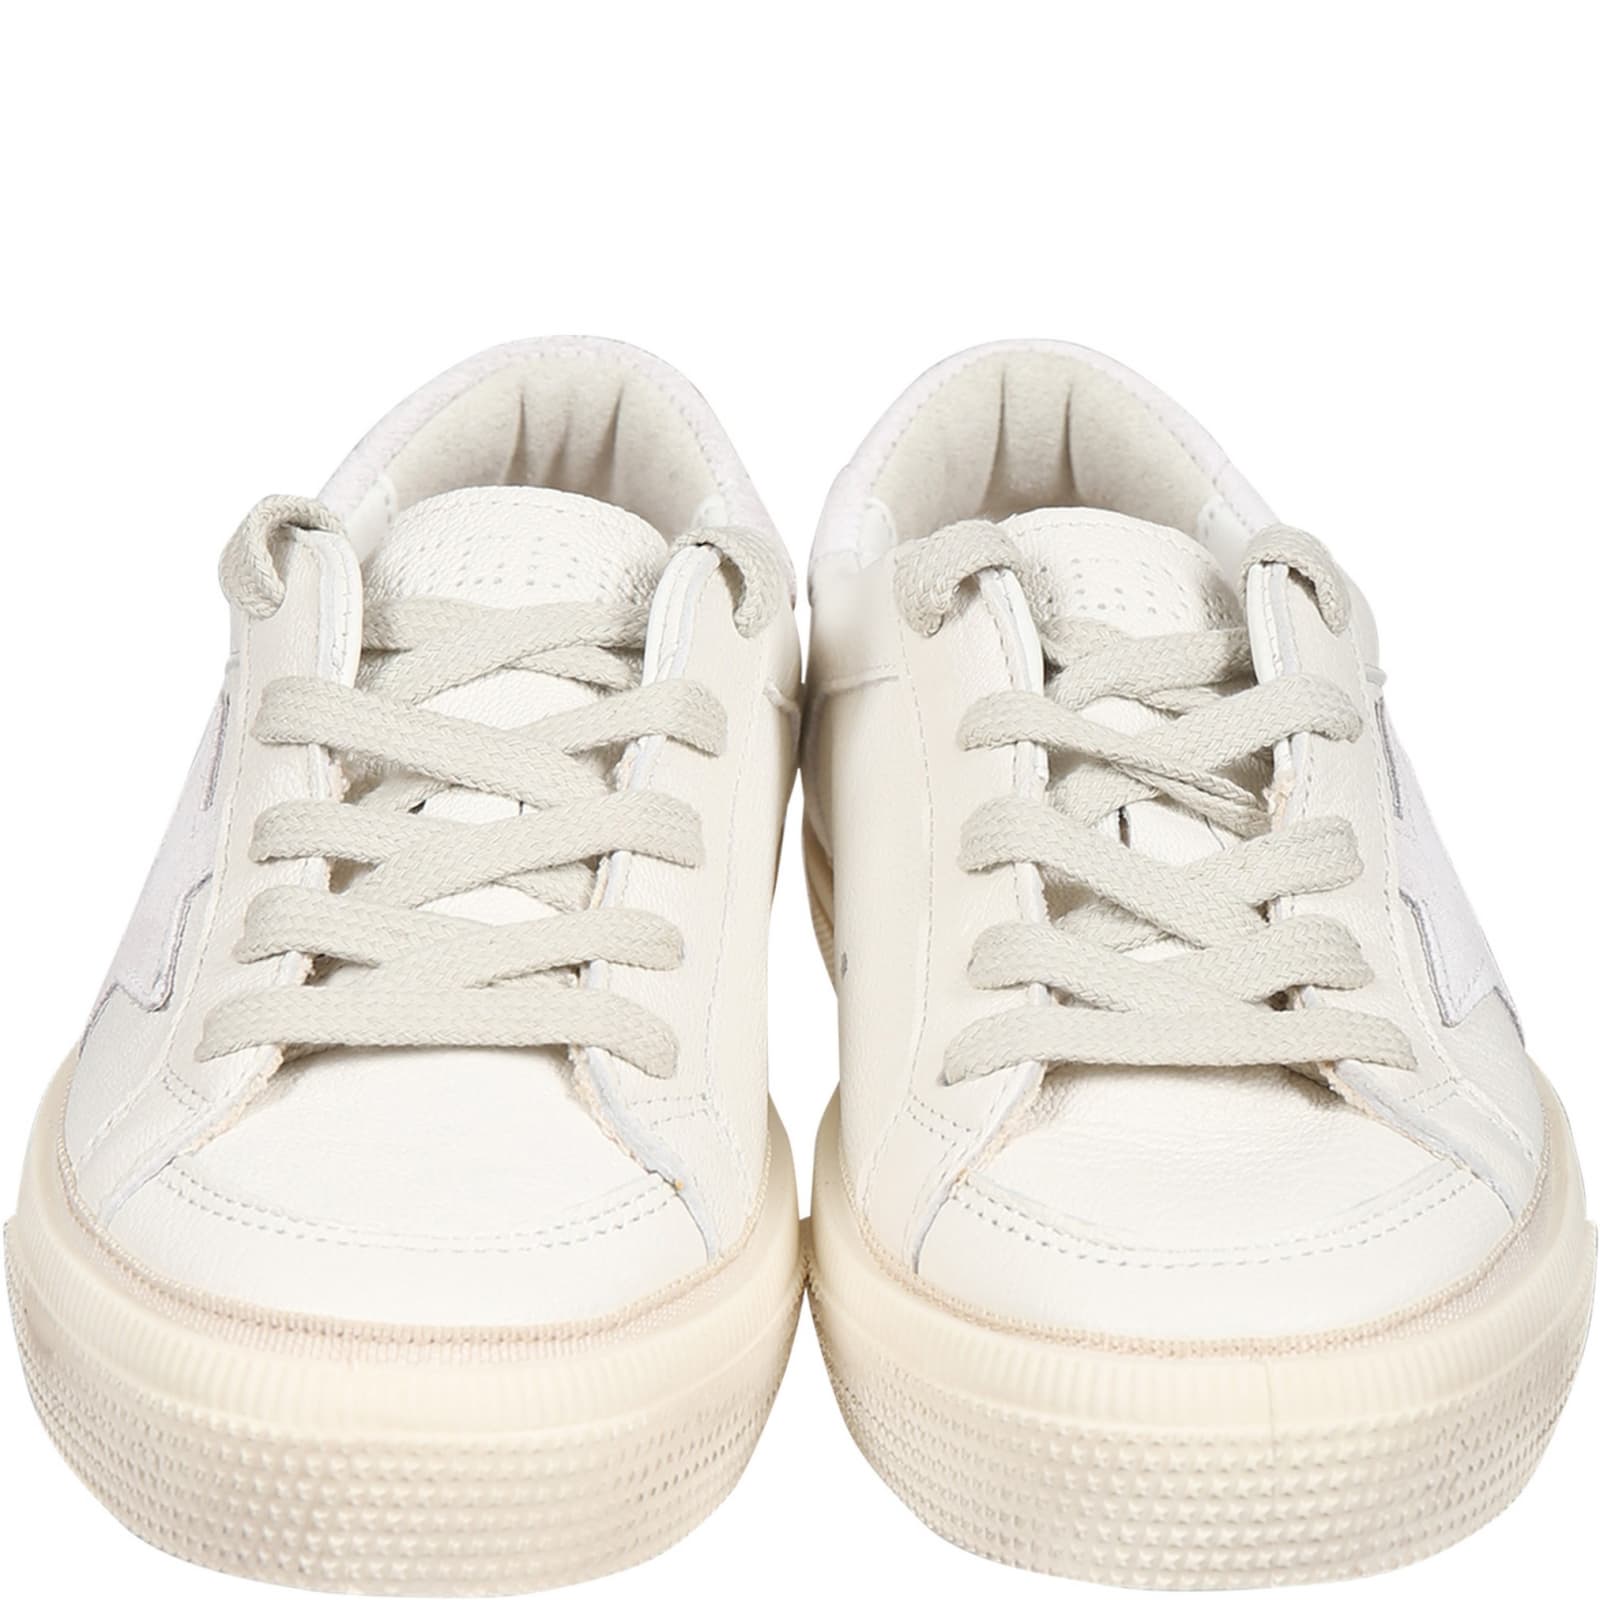 Shop Golden Goose White May Sneakers For Girl With Iconic Star